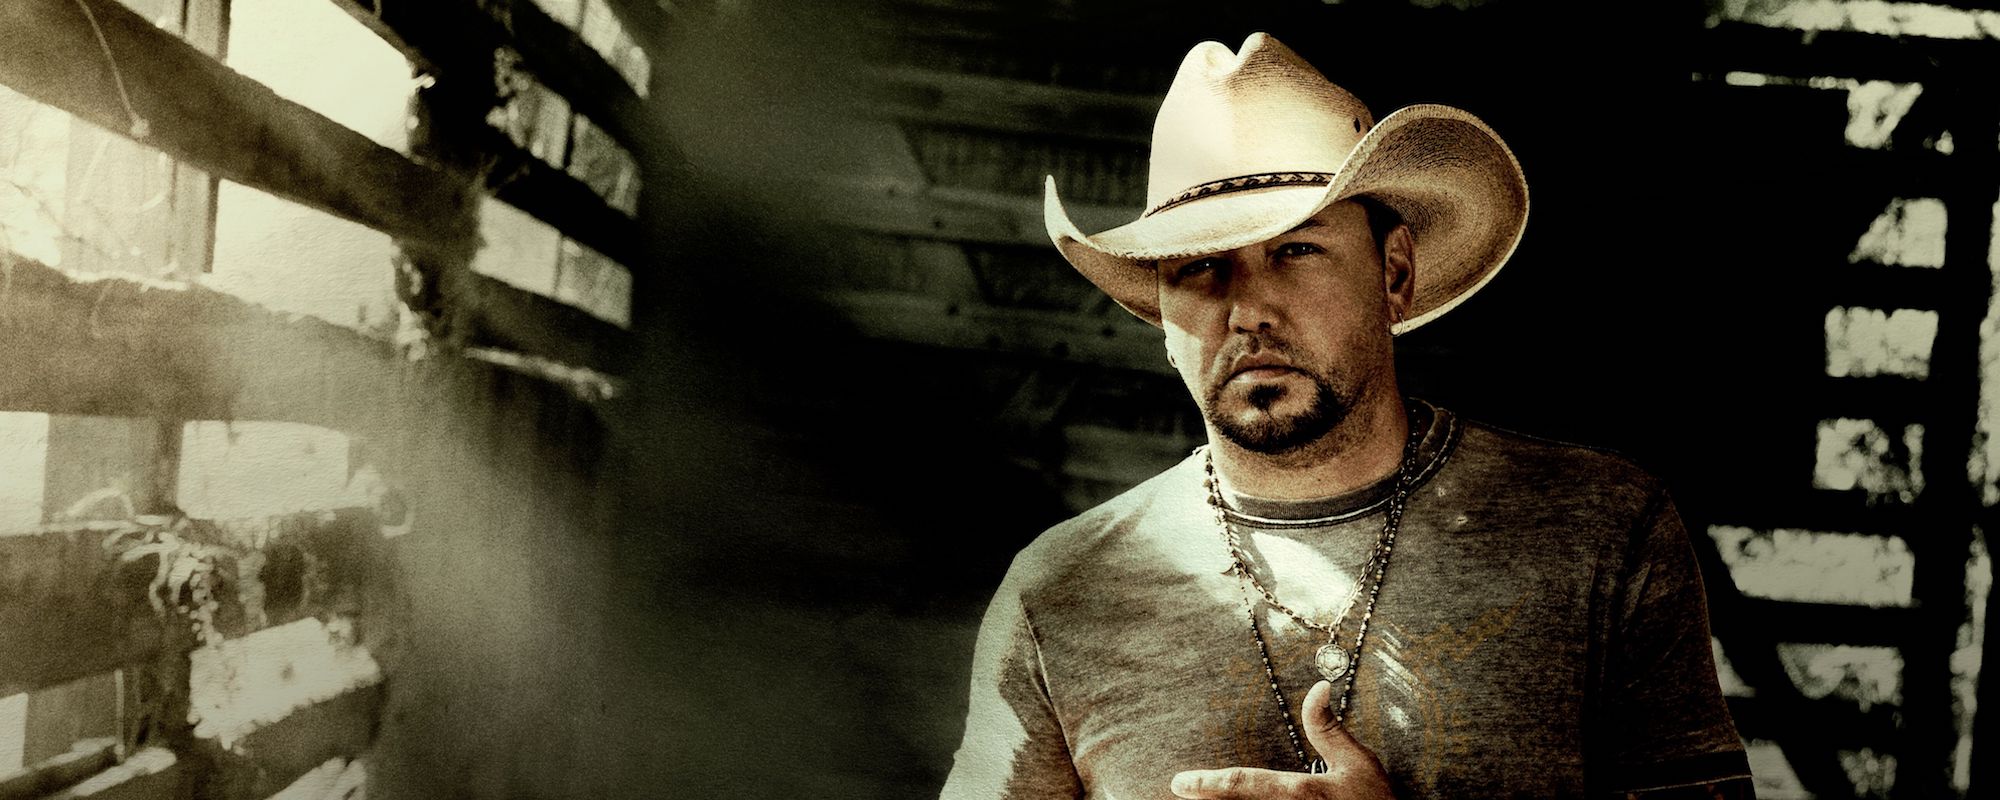 Jason Aldean Suffers Heat Stroke While Performing, Runs Off Stage